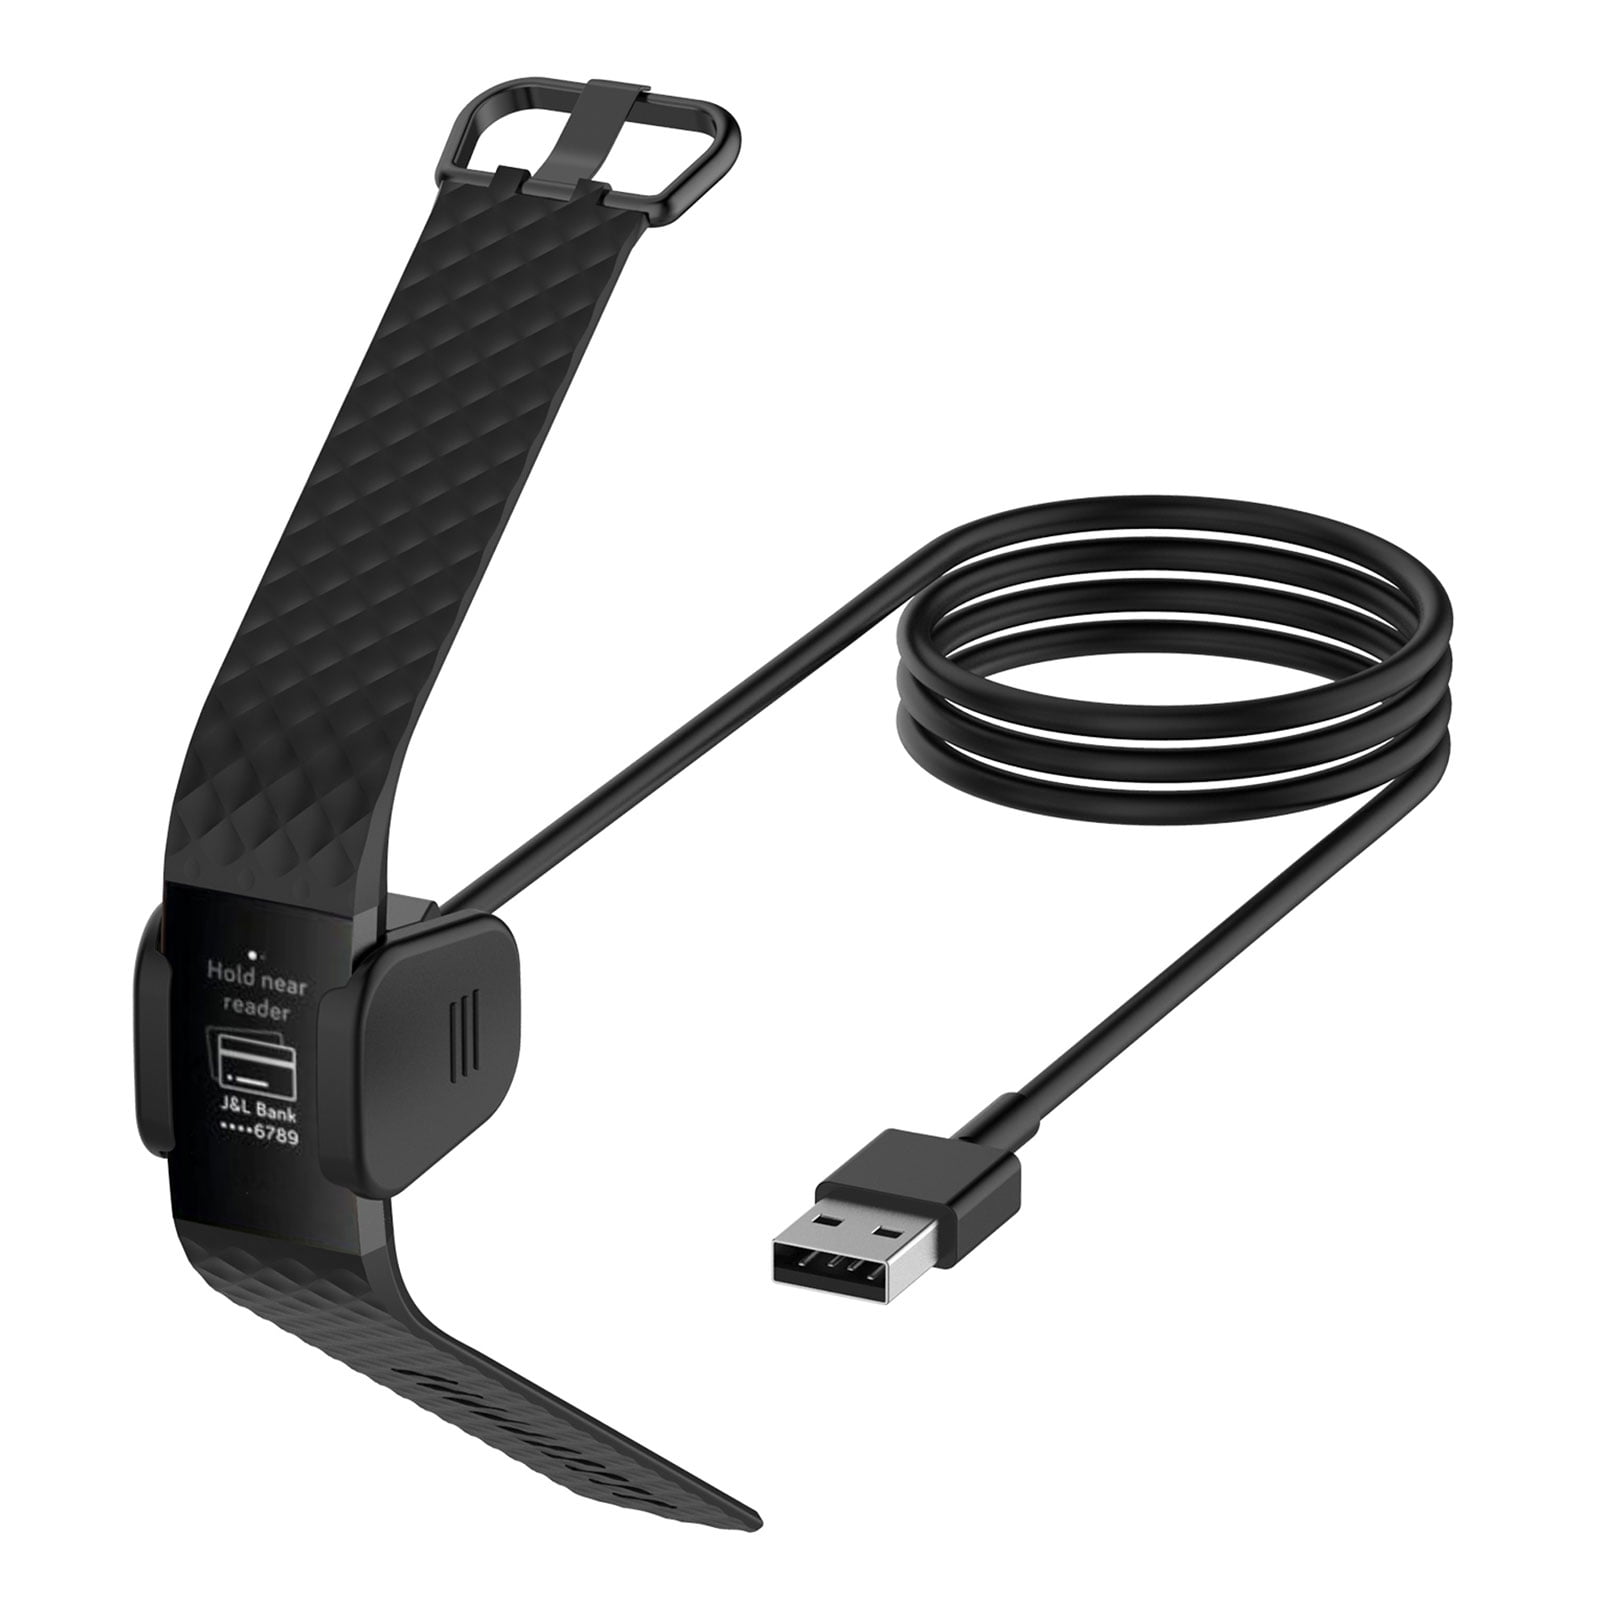 fitbit charge 3 charger walmart